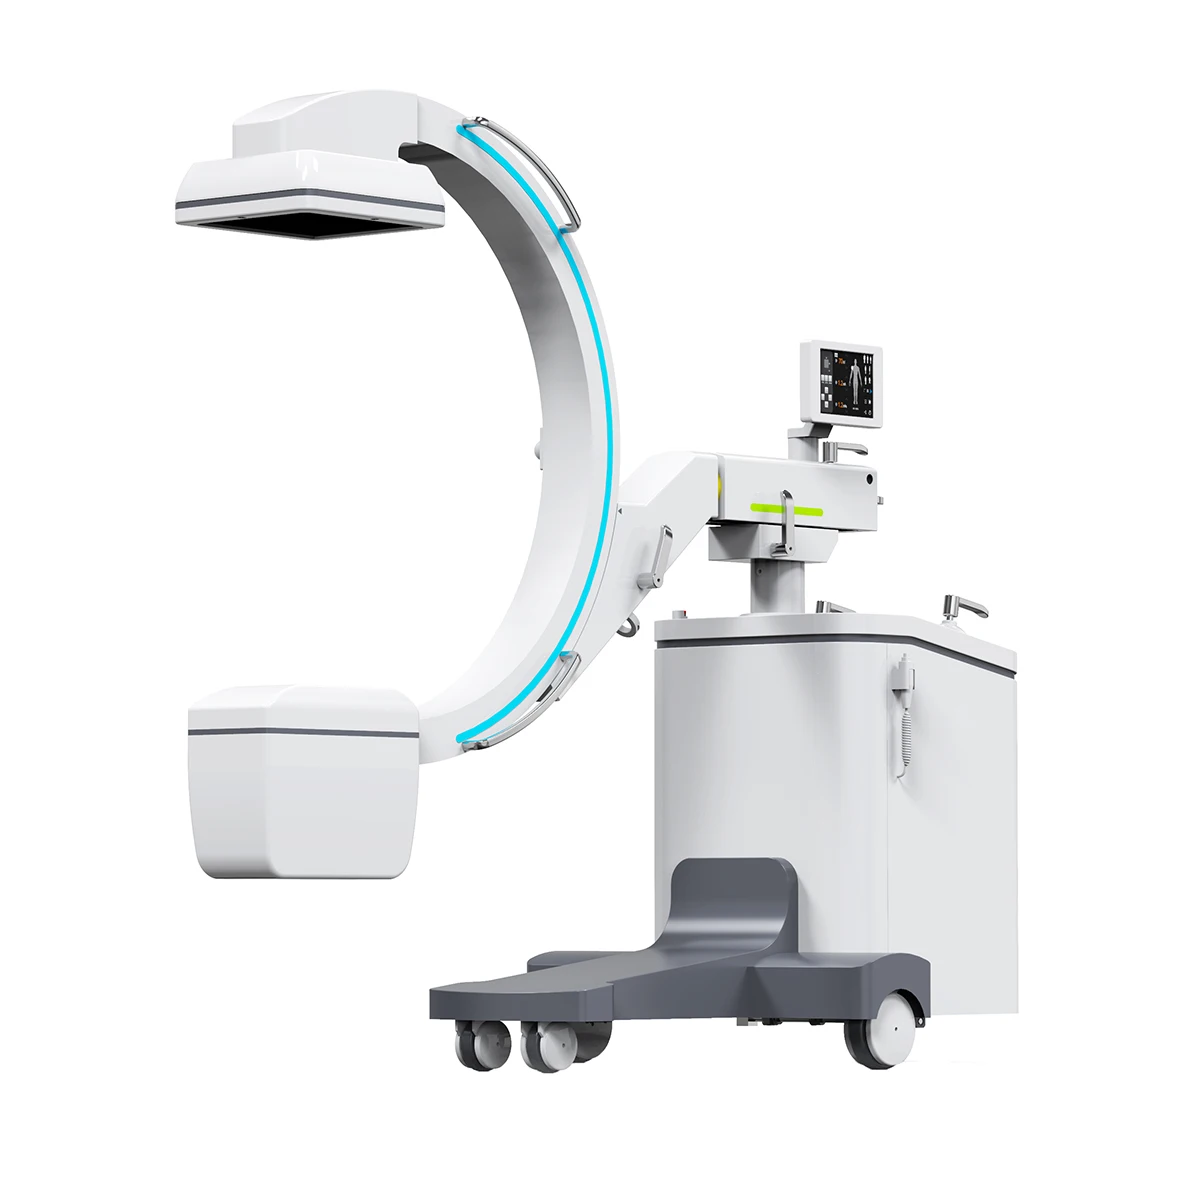 Mobile c arm x-ray machine high frequency digital x ray machine mobile x-ray machine MSLCX50